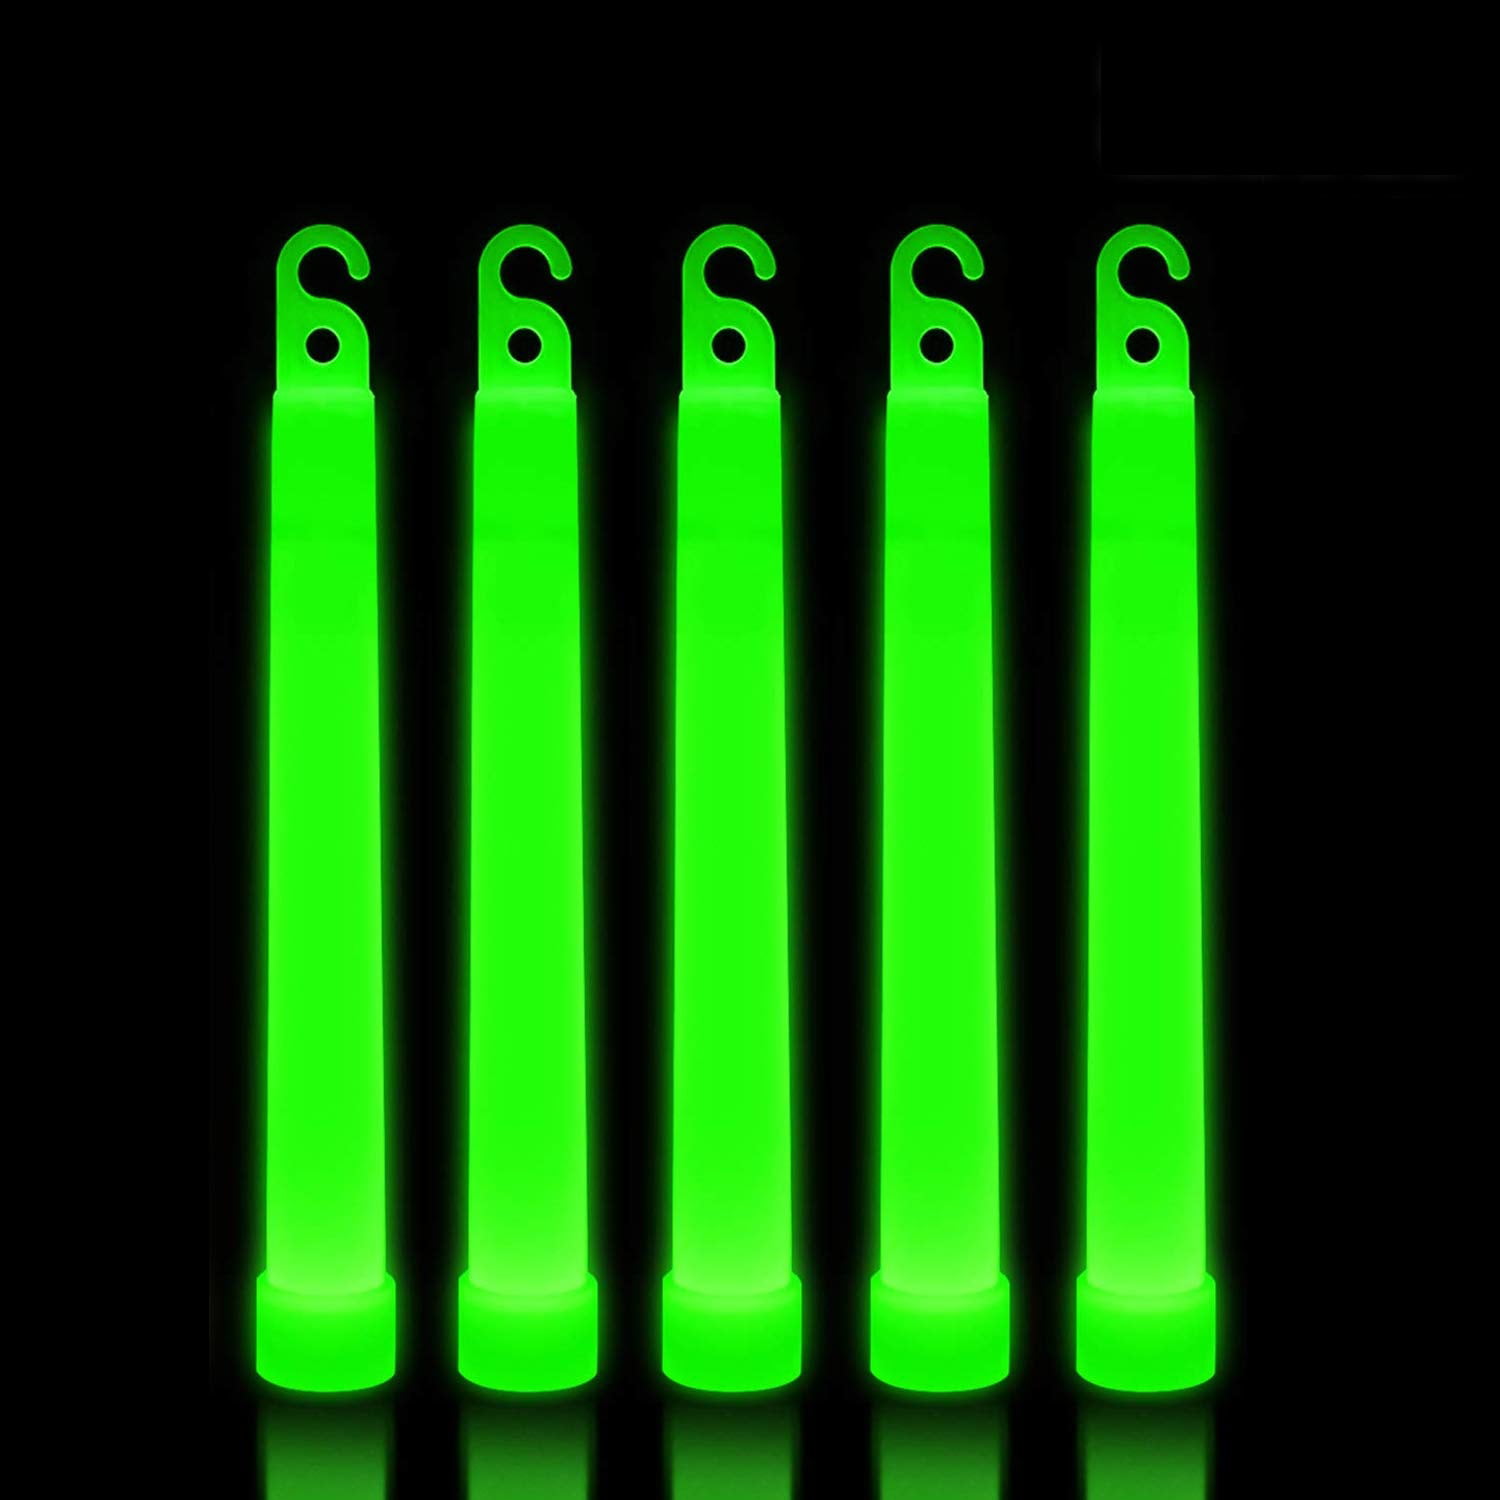 Lumistick 20 Count Jumbo Glowsticks White, 20 Ultra Bright 12 inch Long Giant 15mm Thick Flat Bottom Long Lasting Up to 12 Hours Party Light Sticks for Events Camping Emergency 